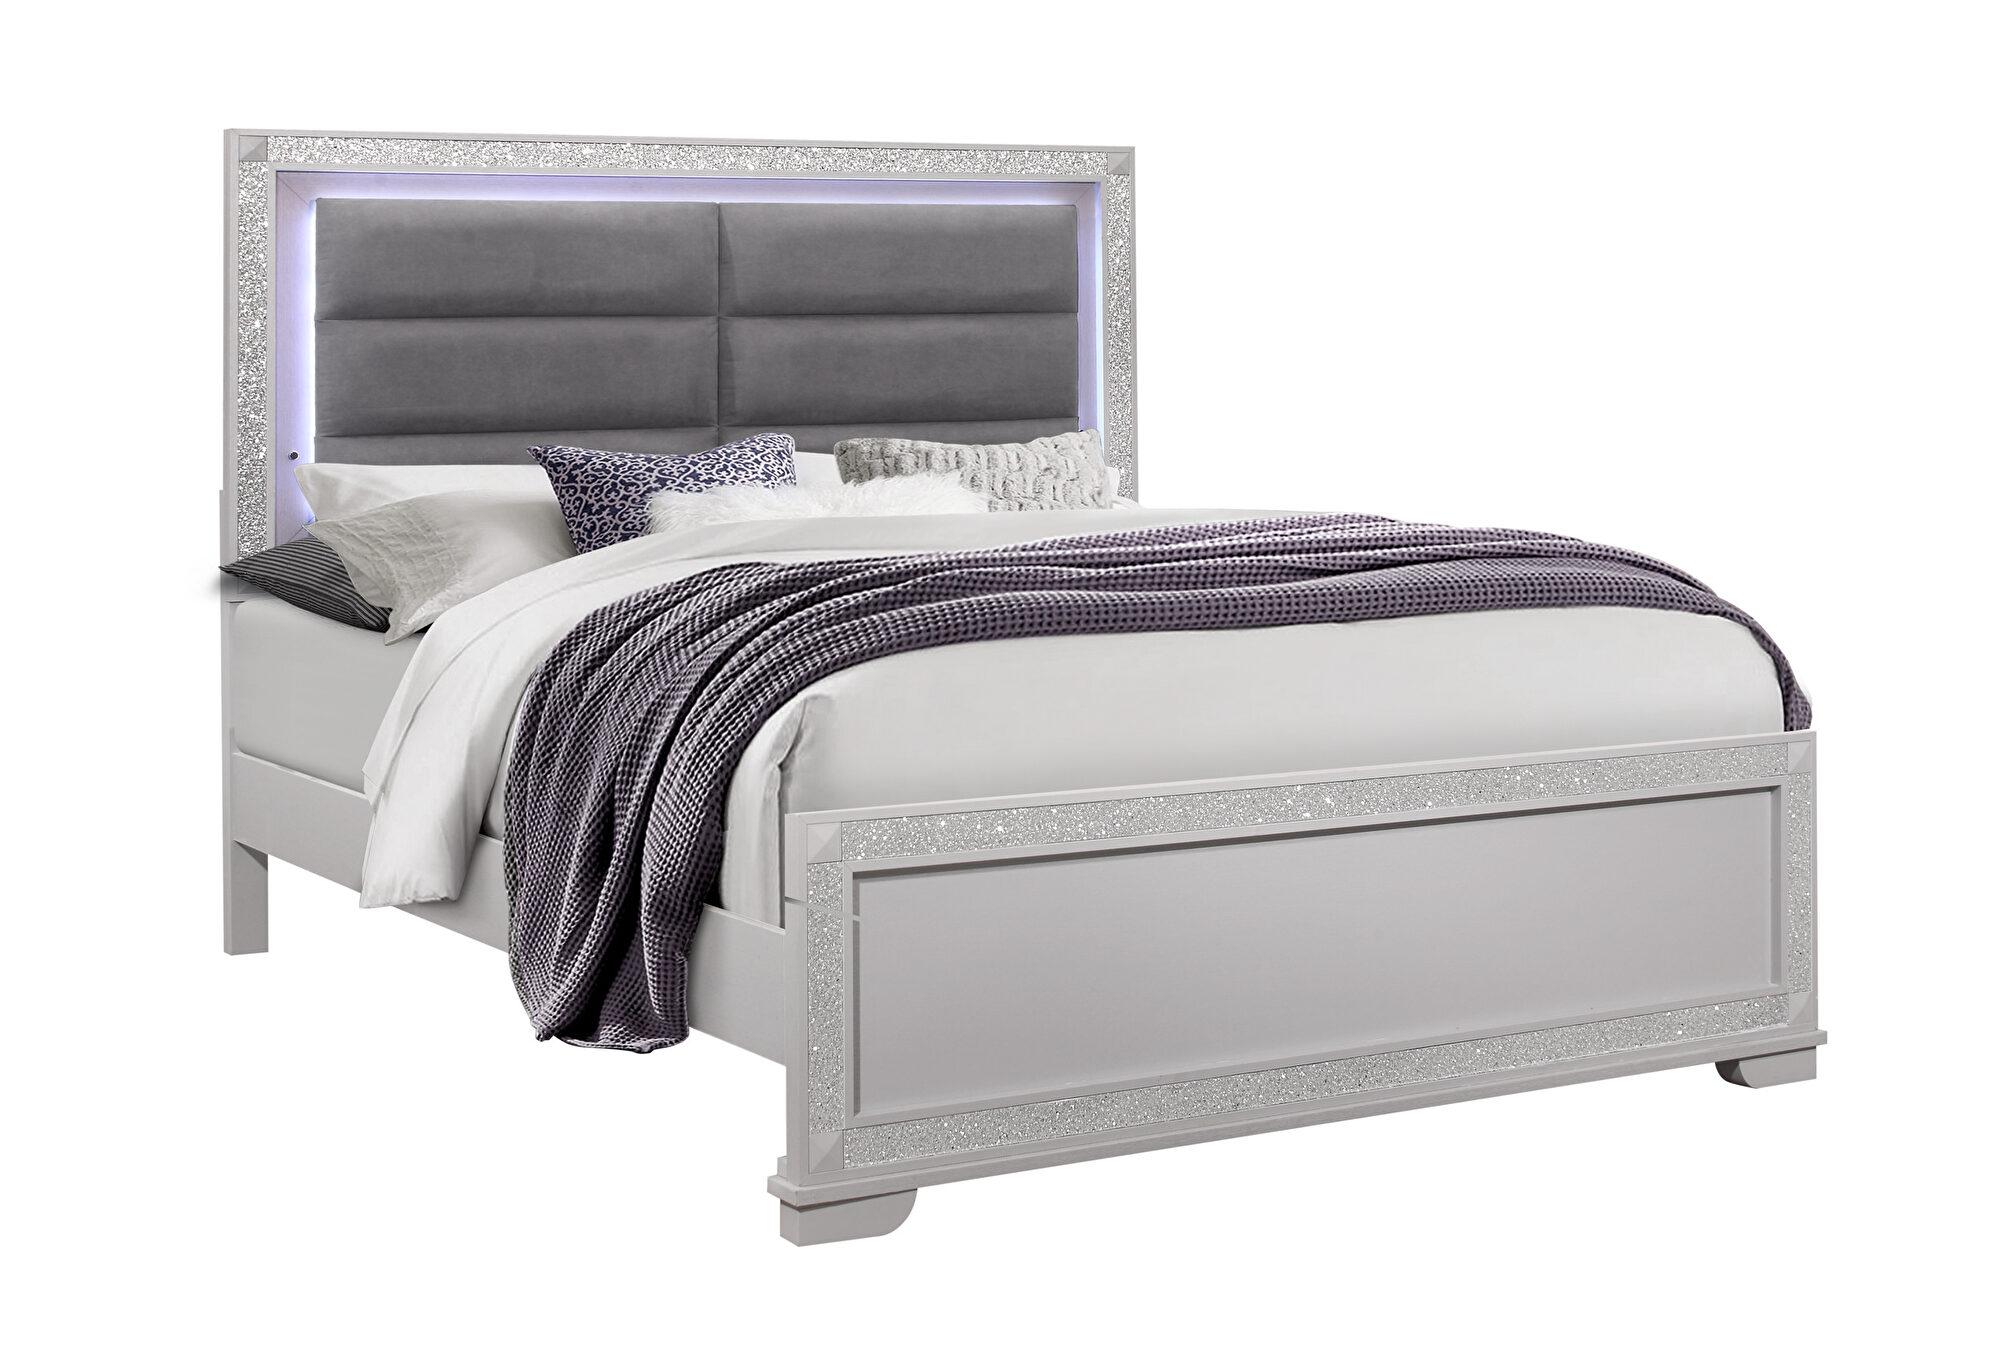 Modern Platform Bed CHALICE CHALICE-SILVER-KB in Silver Faux Leather